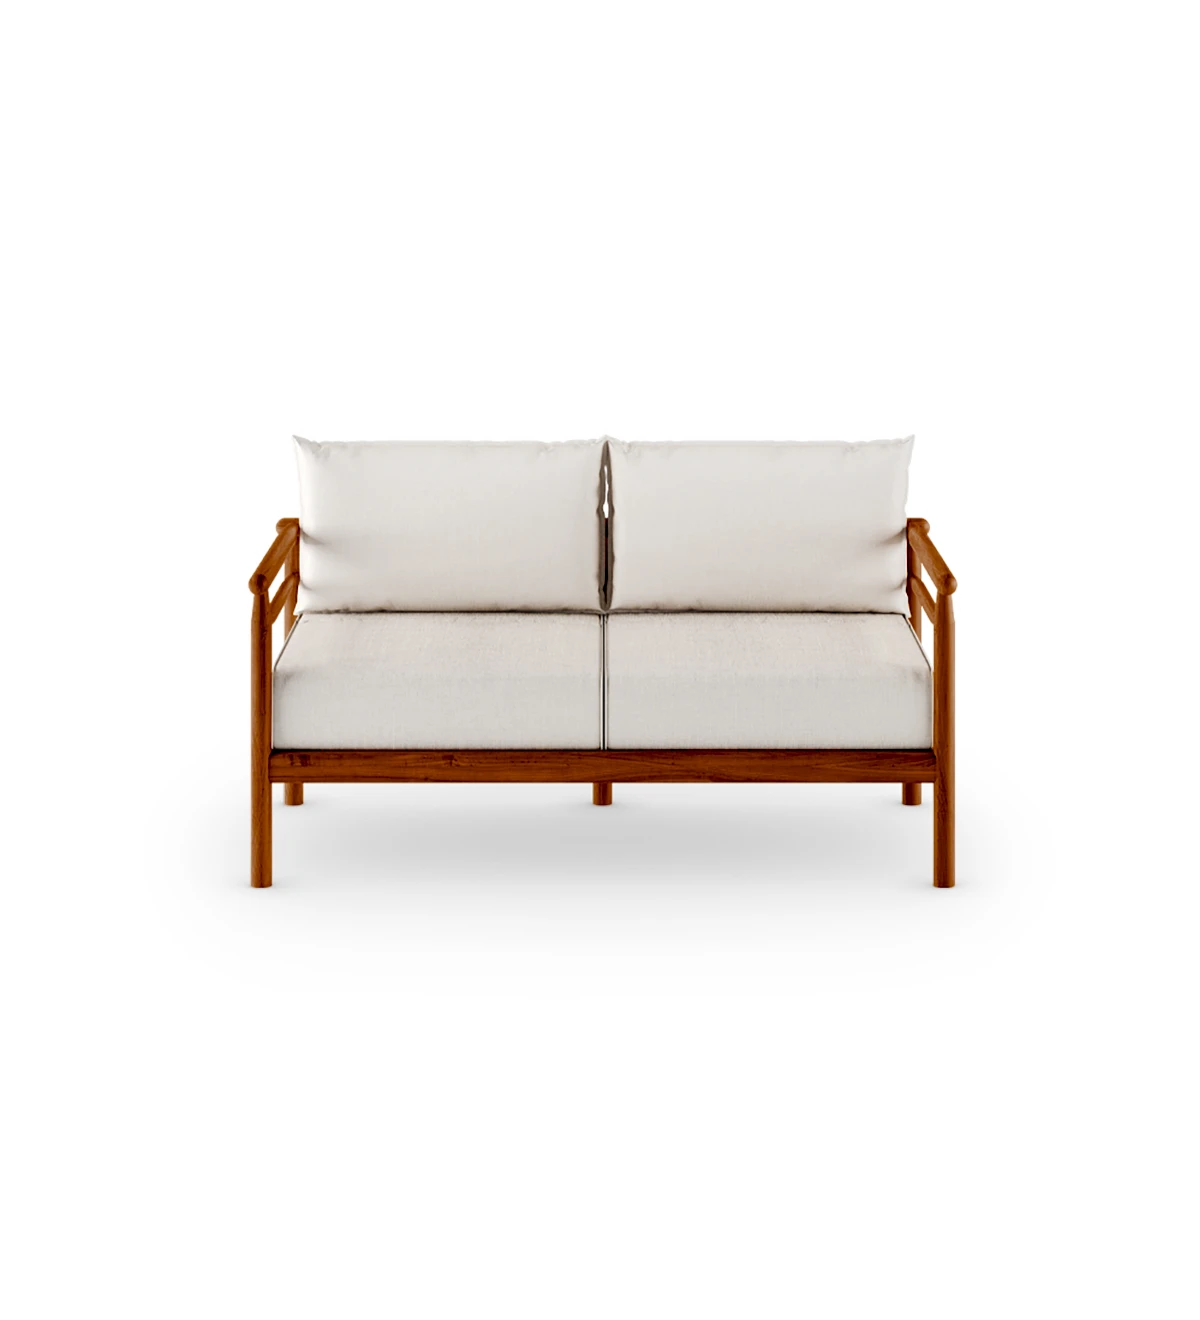 2 seater sofa with fabric upholstered cushions and honey-colored natural wood structure.